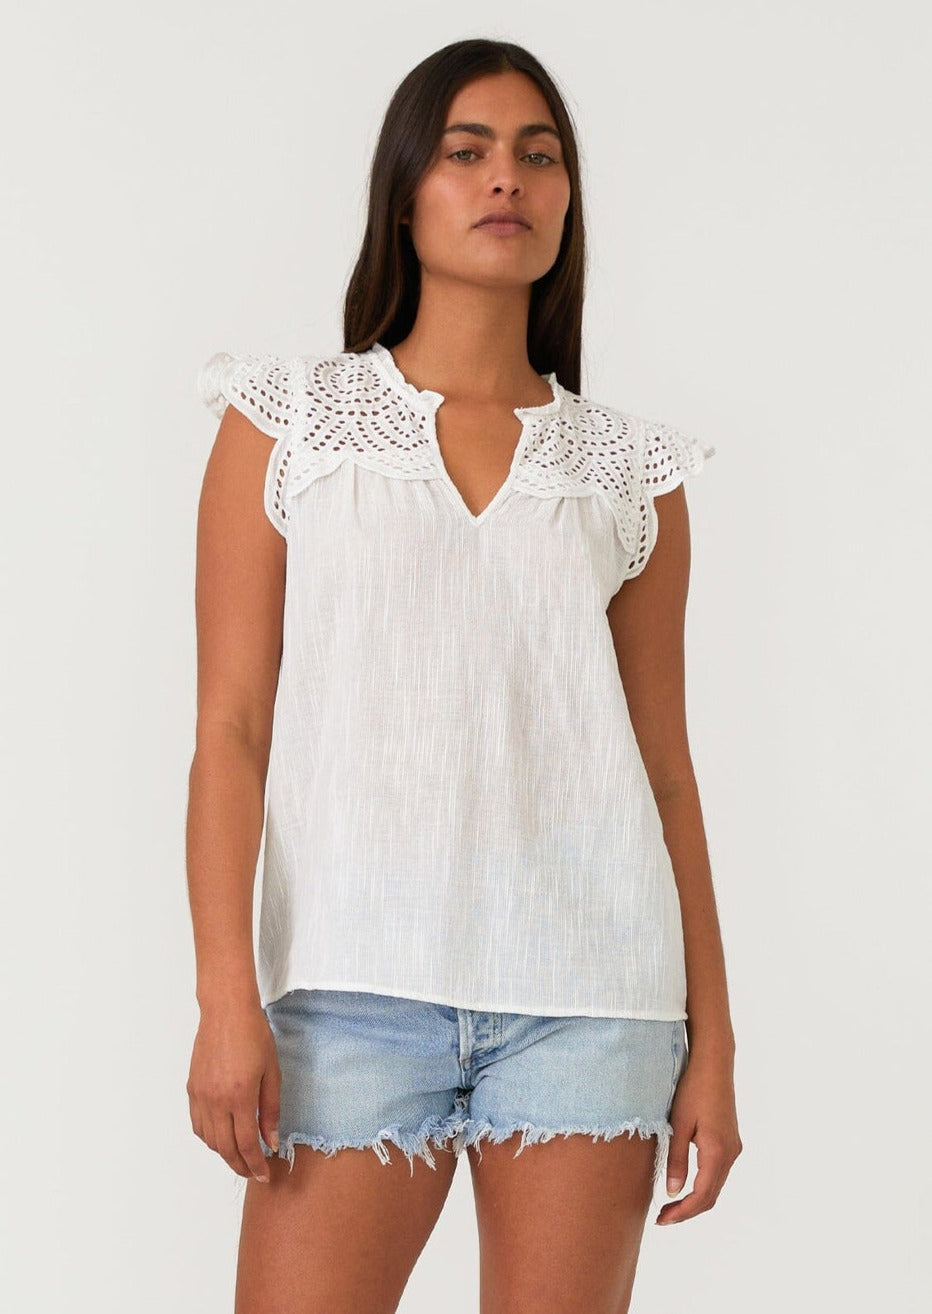 Lovestitch Evie Lace Tee